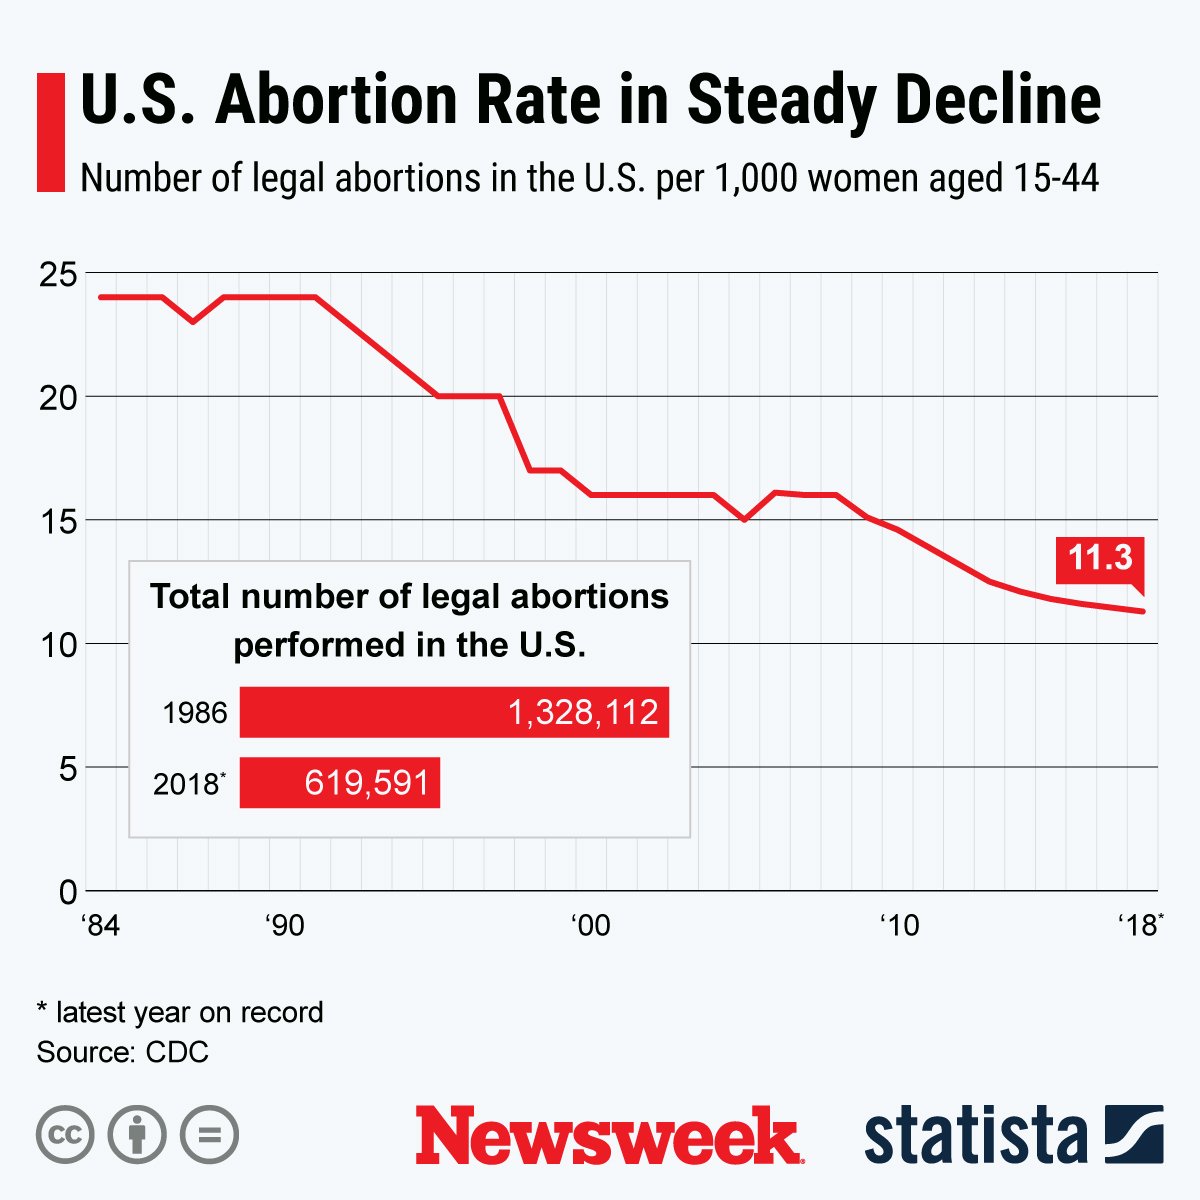 U.S. abortion rate